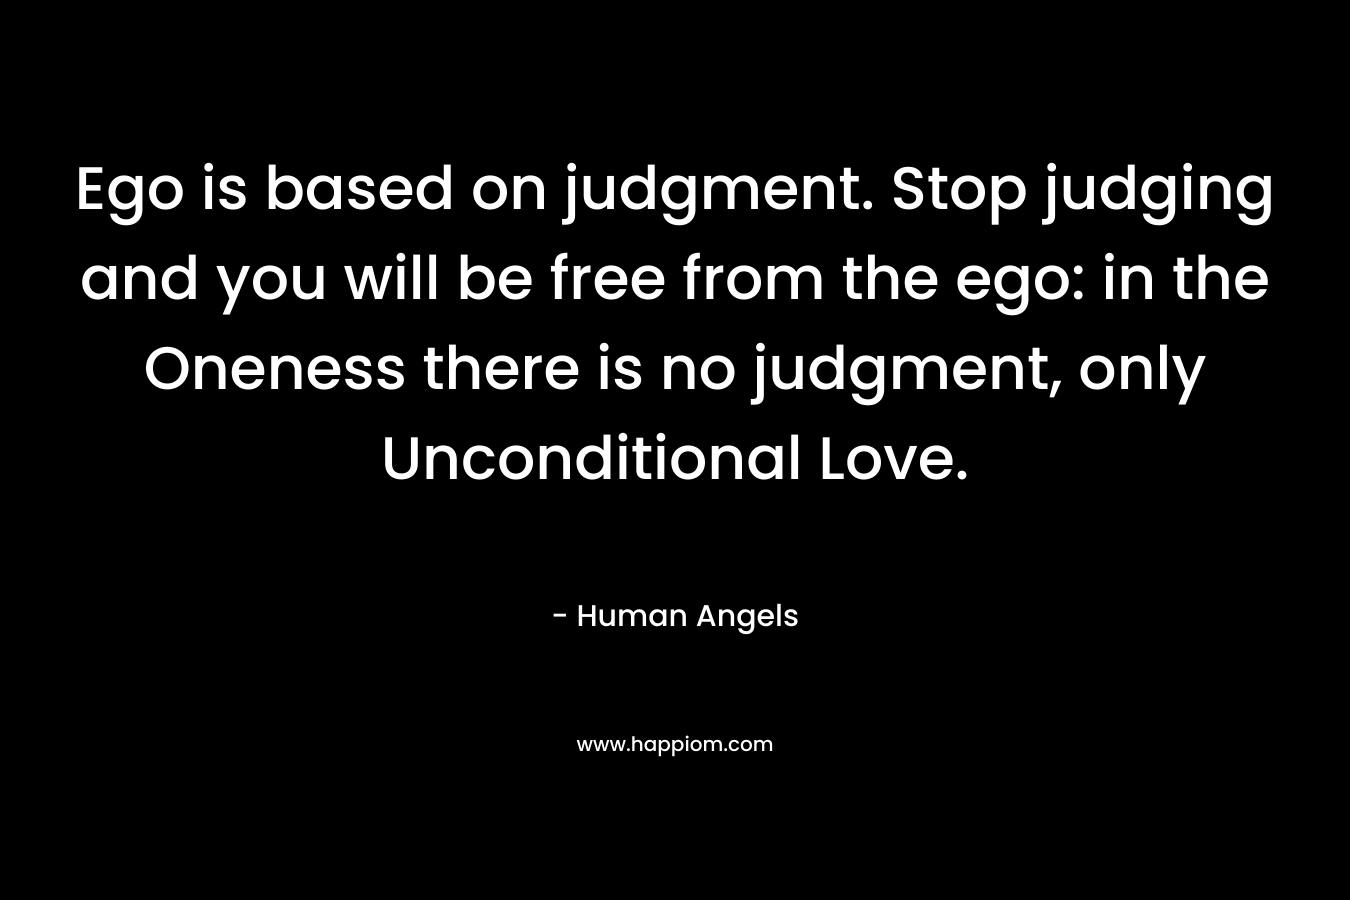 Ego is based on judgment. Stop judging and you will be free from the ego: in the Oneness there is no judgment, only Unconditional Love. – Human Angels